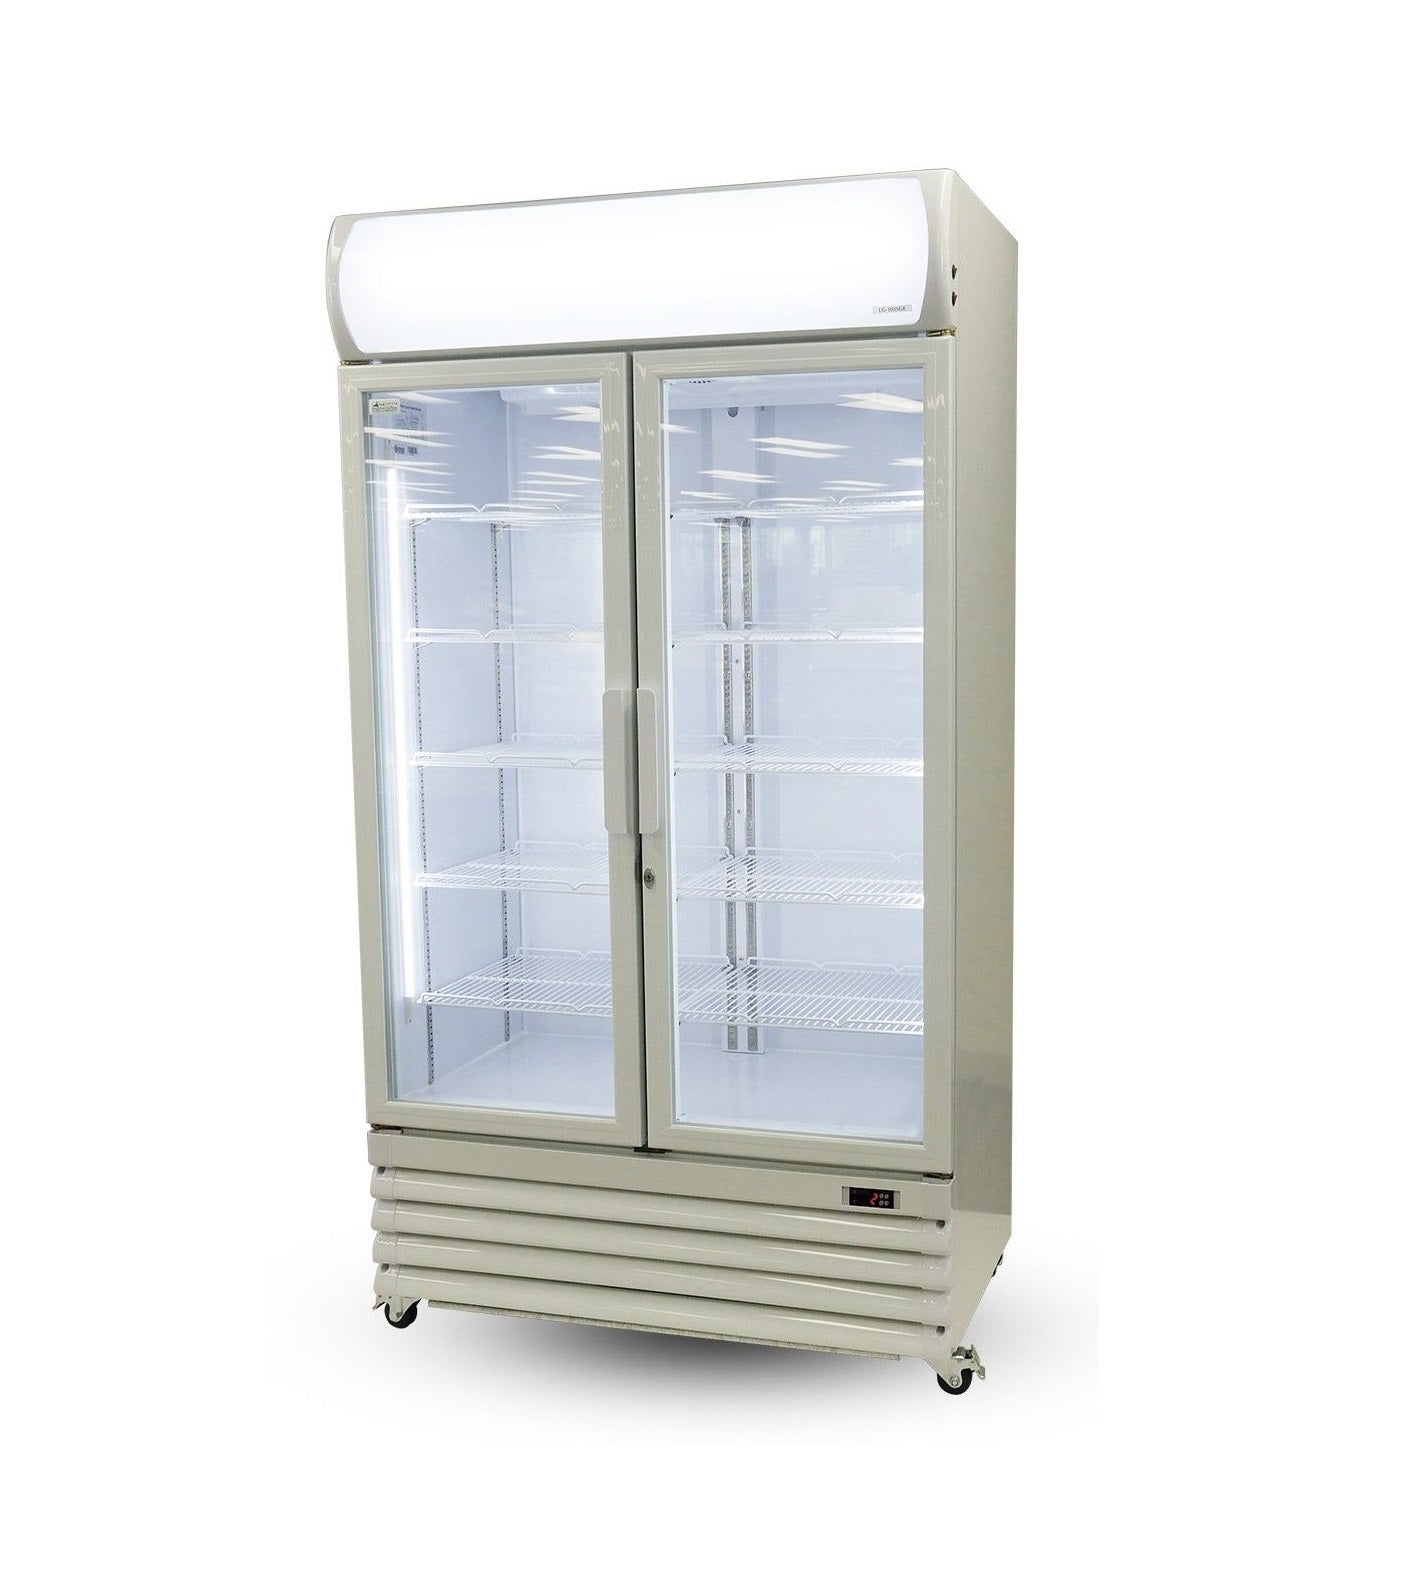 Thermaster 1000L Double Glass Door Upright Drink Fridge White LG-1000GE Upright Glass Door Fridges